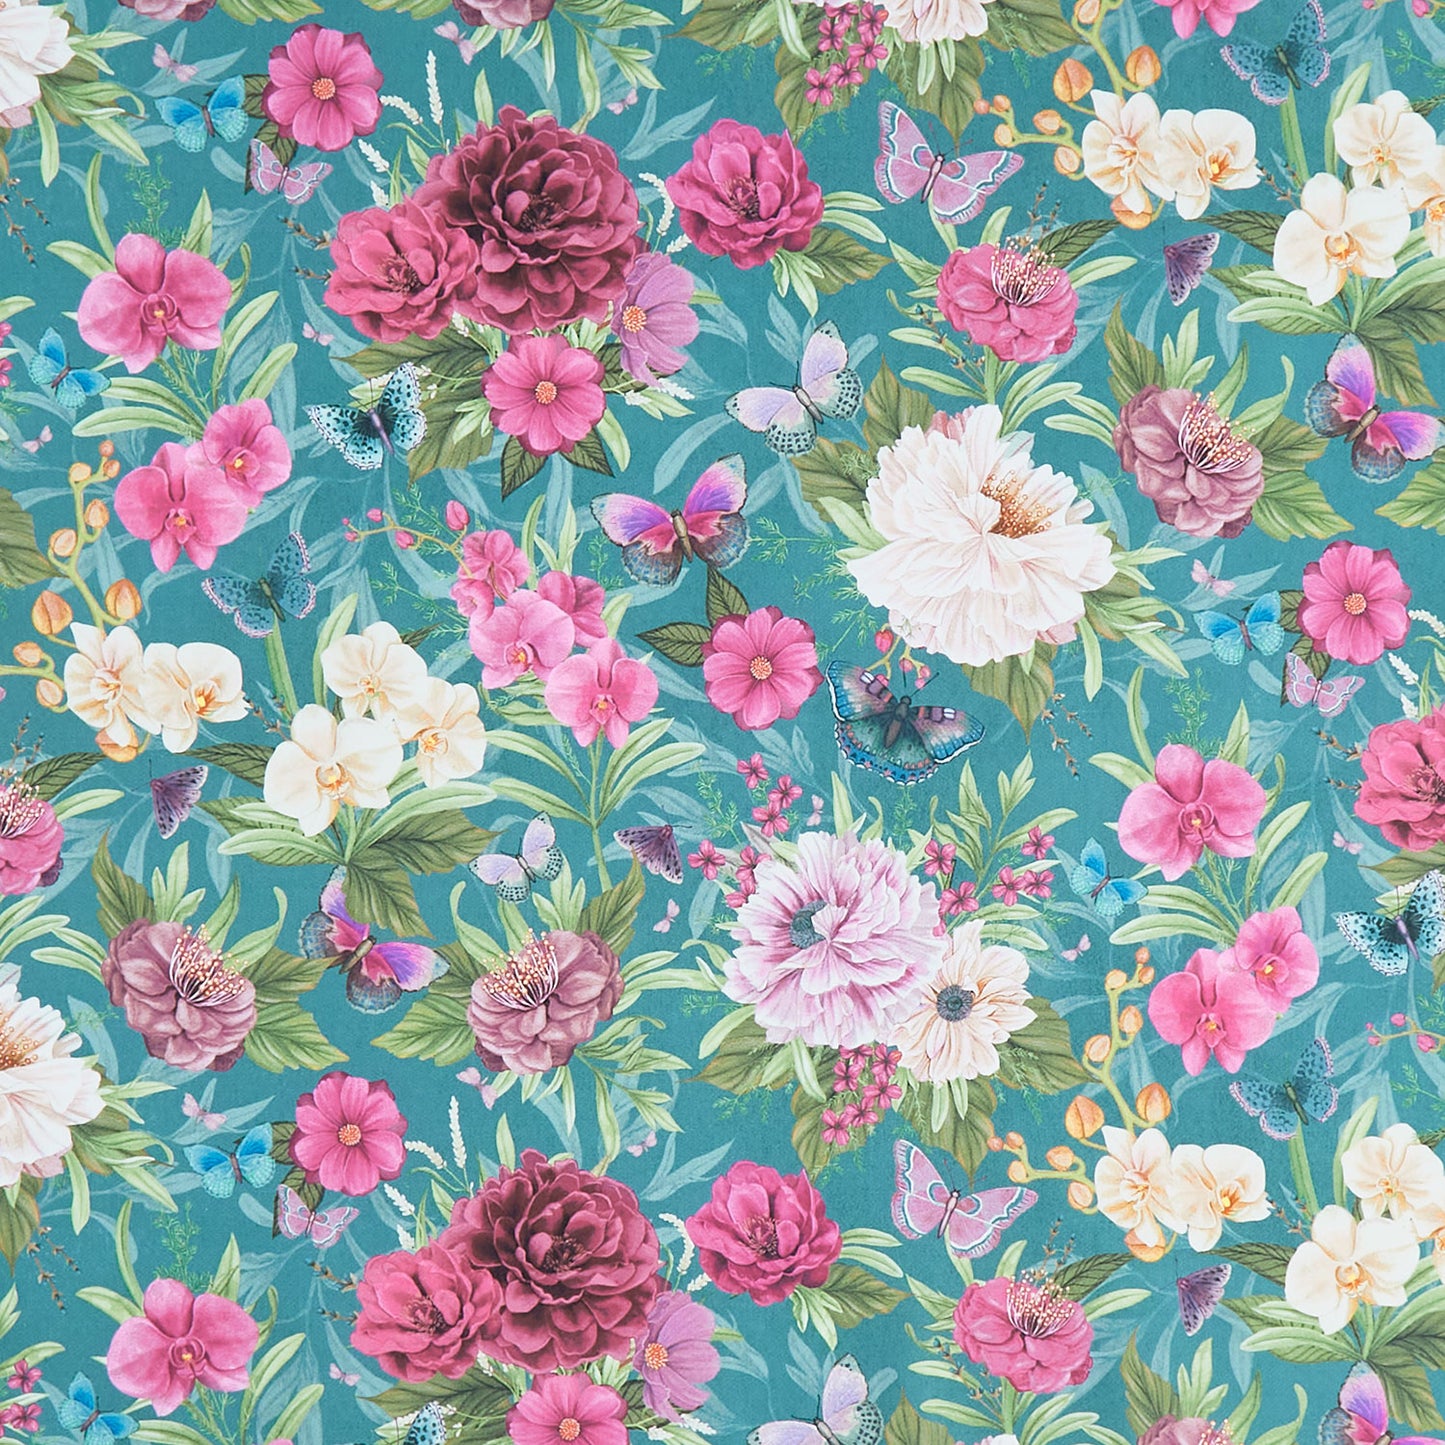 Midnight Garden - Large Floral Teal Yardage Primary Image